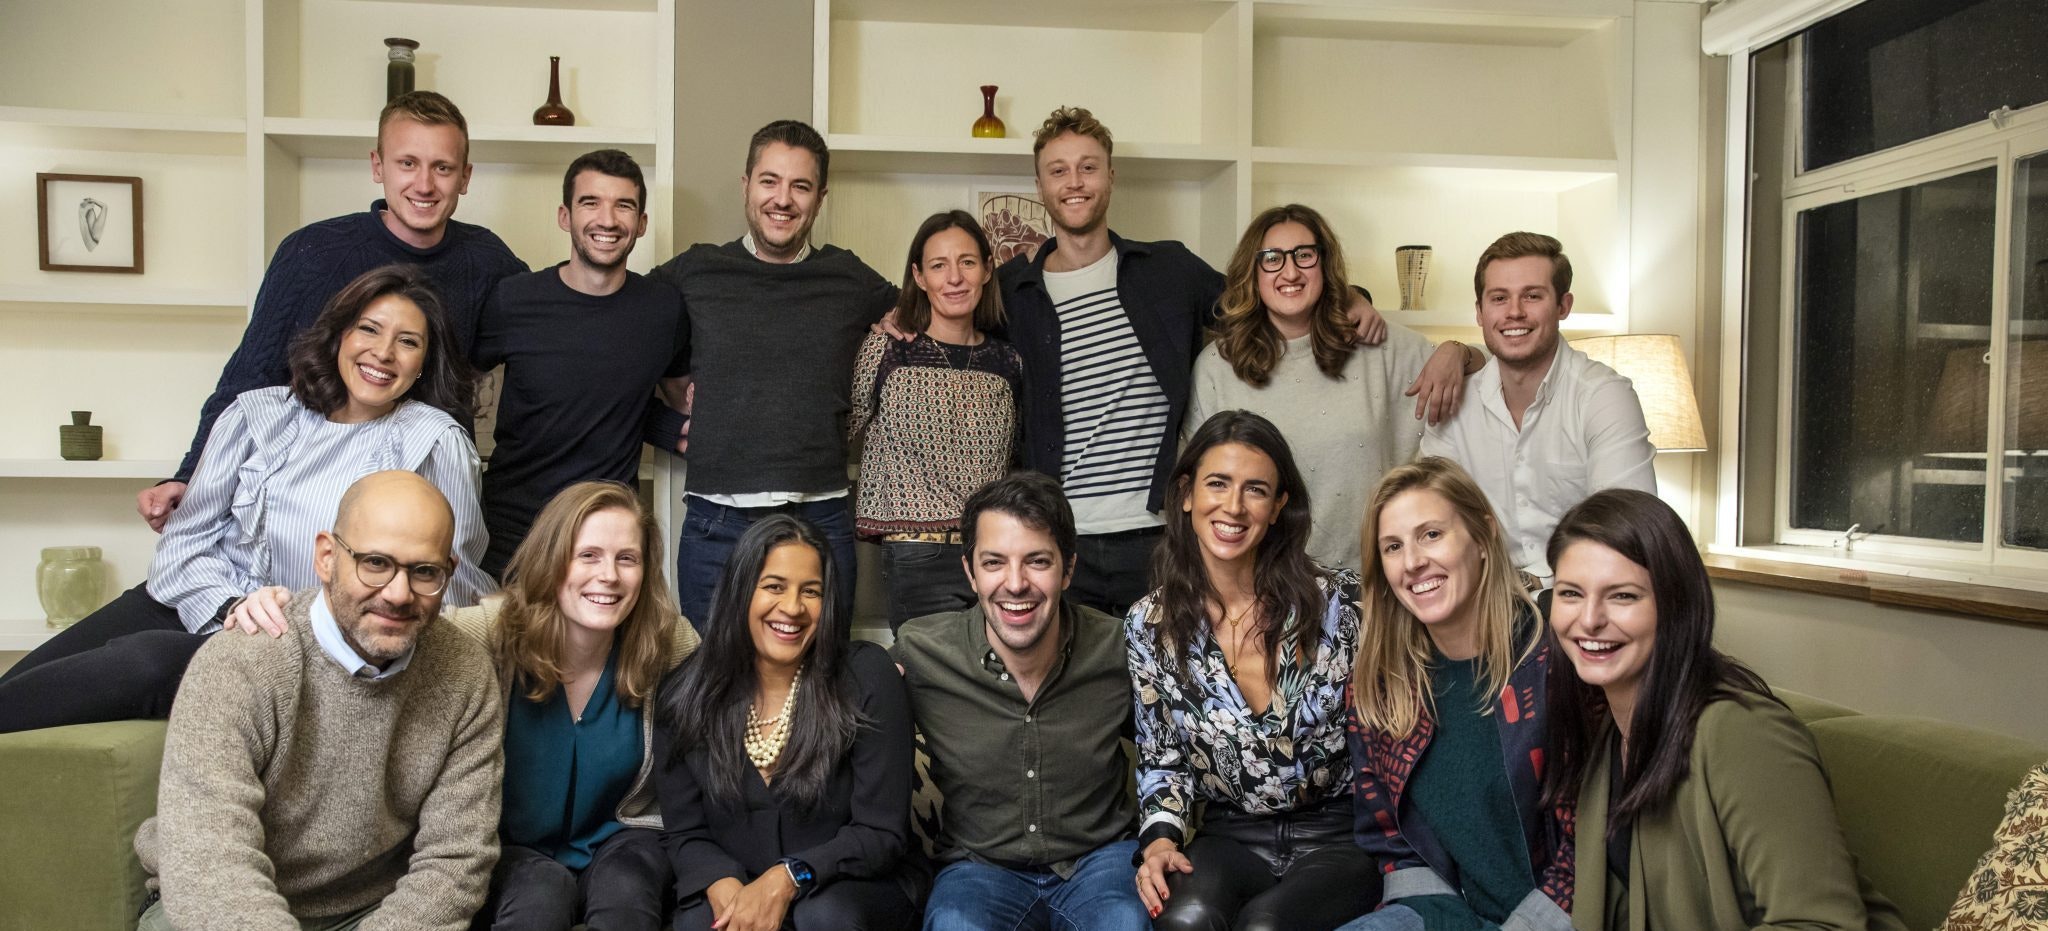 An image of the team at early-stage VC firm Seedcamp, one of the top seed investors in the UK